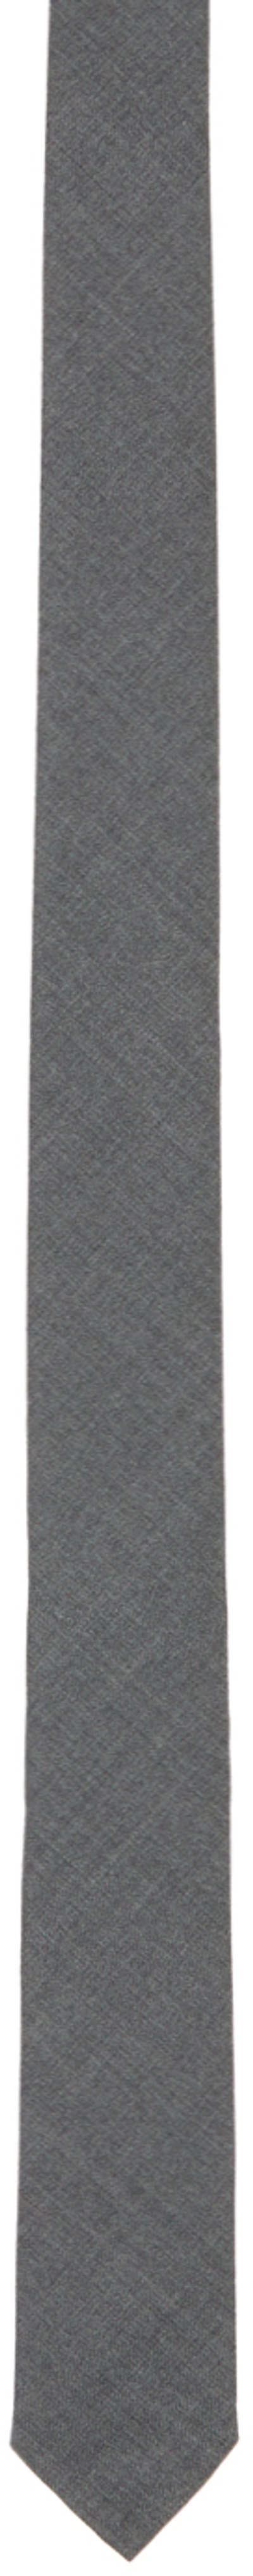 Thom Browne Gray Classic Tie In 035 Med Grey